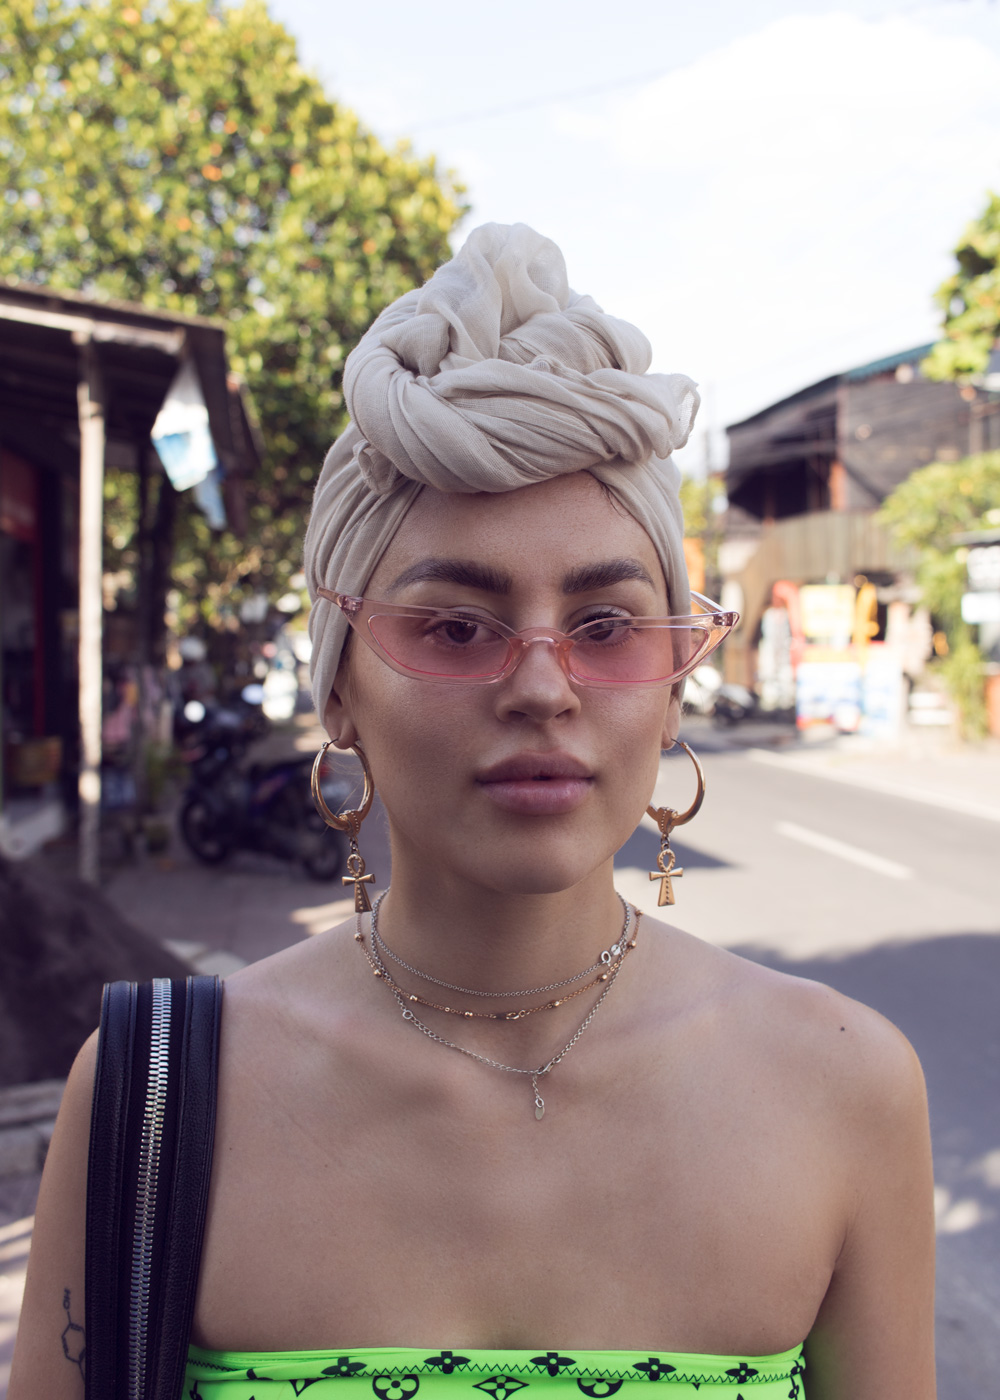 Street portrait of a young woman in Canggu Bali, after
Photoshop